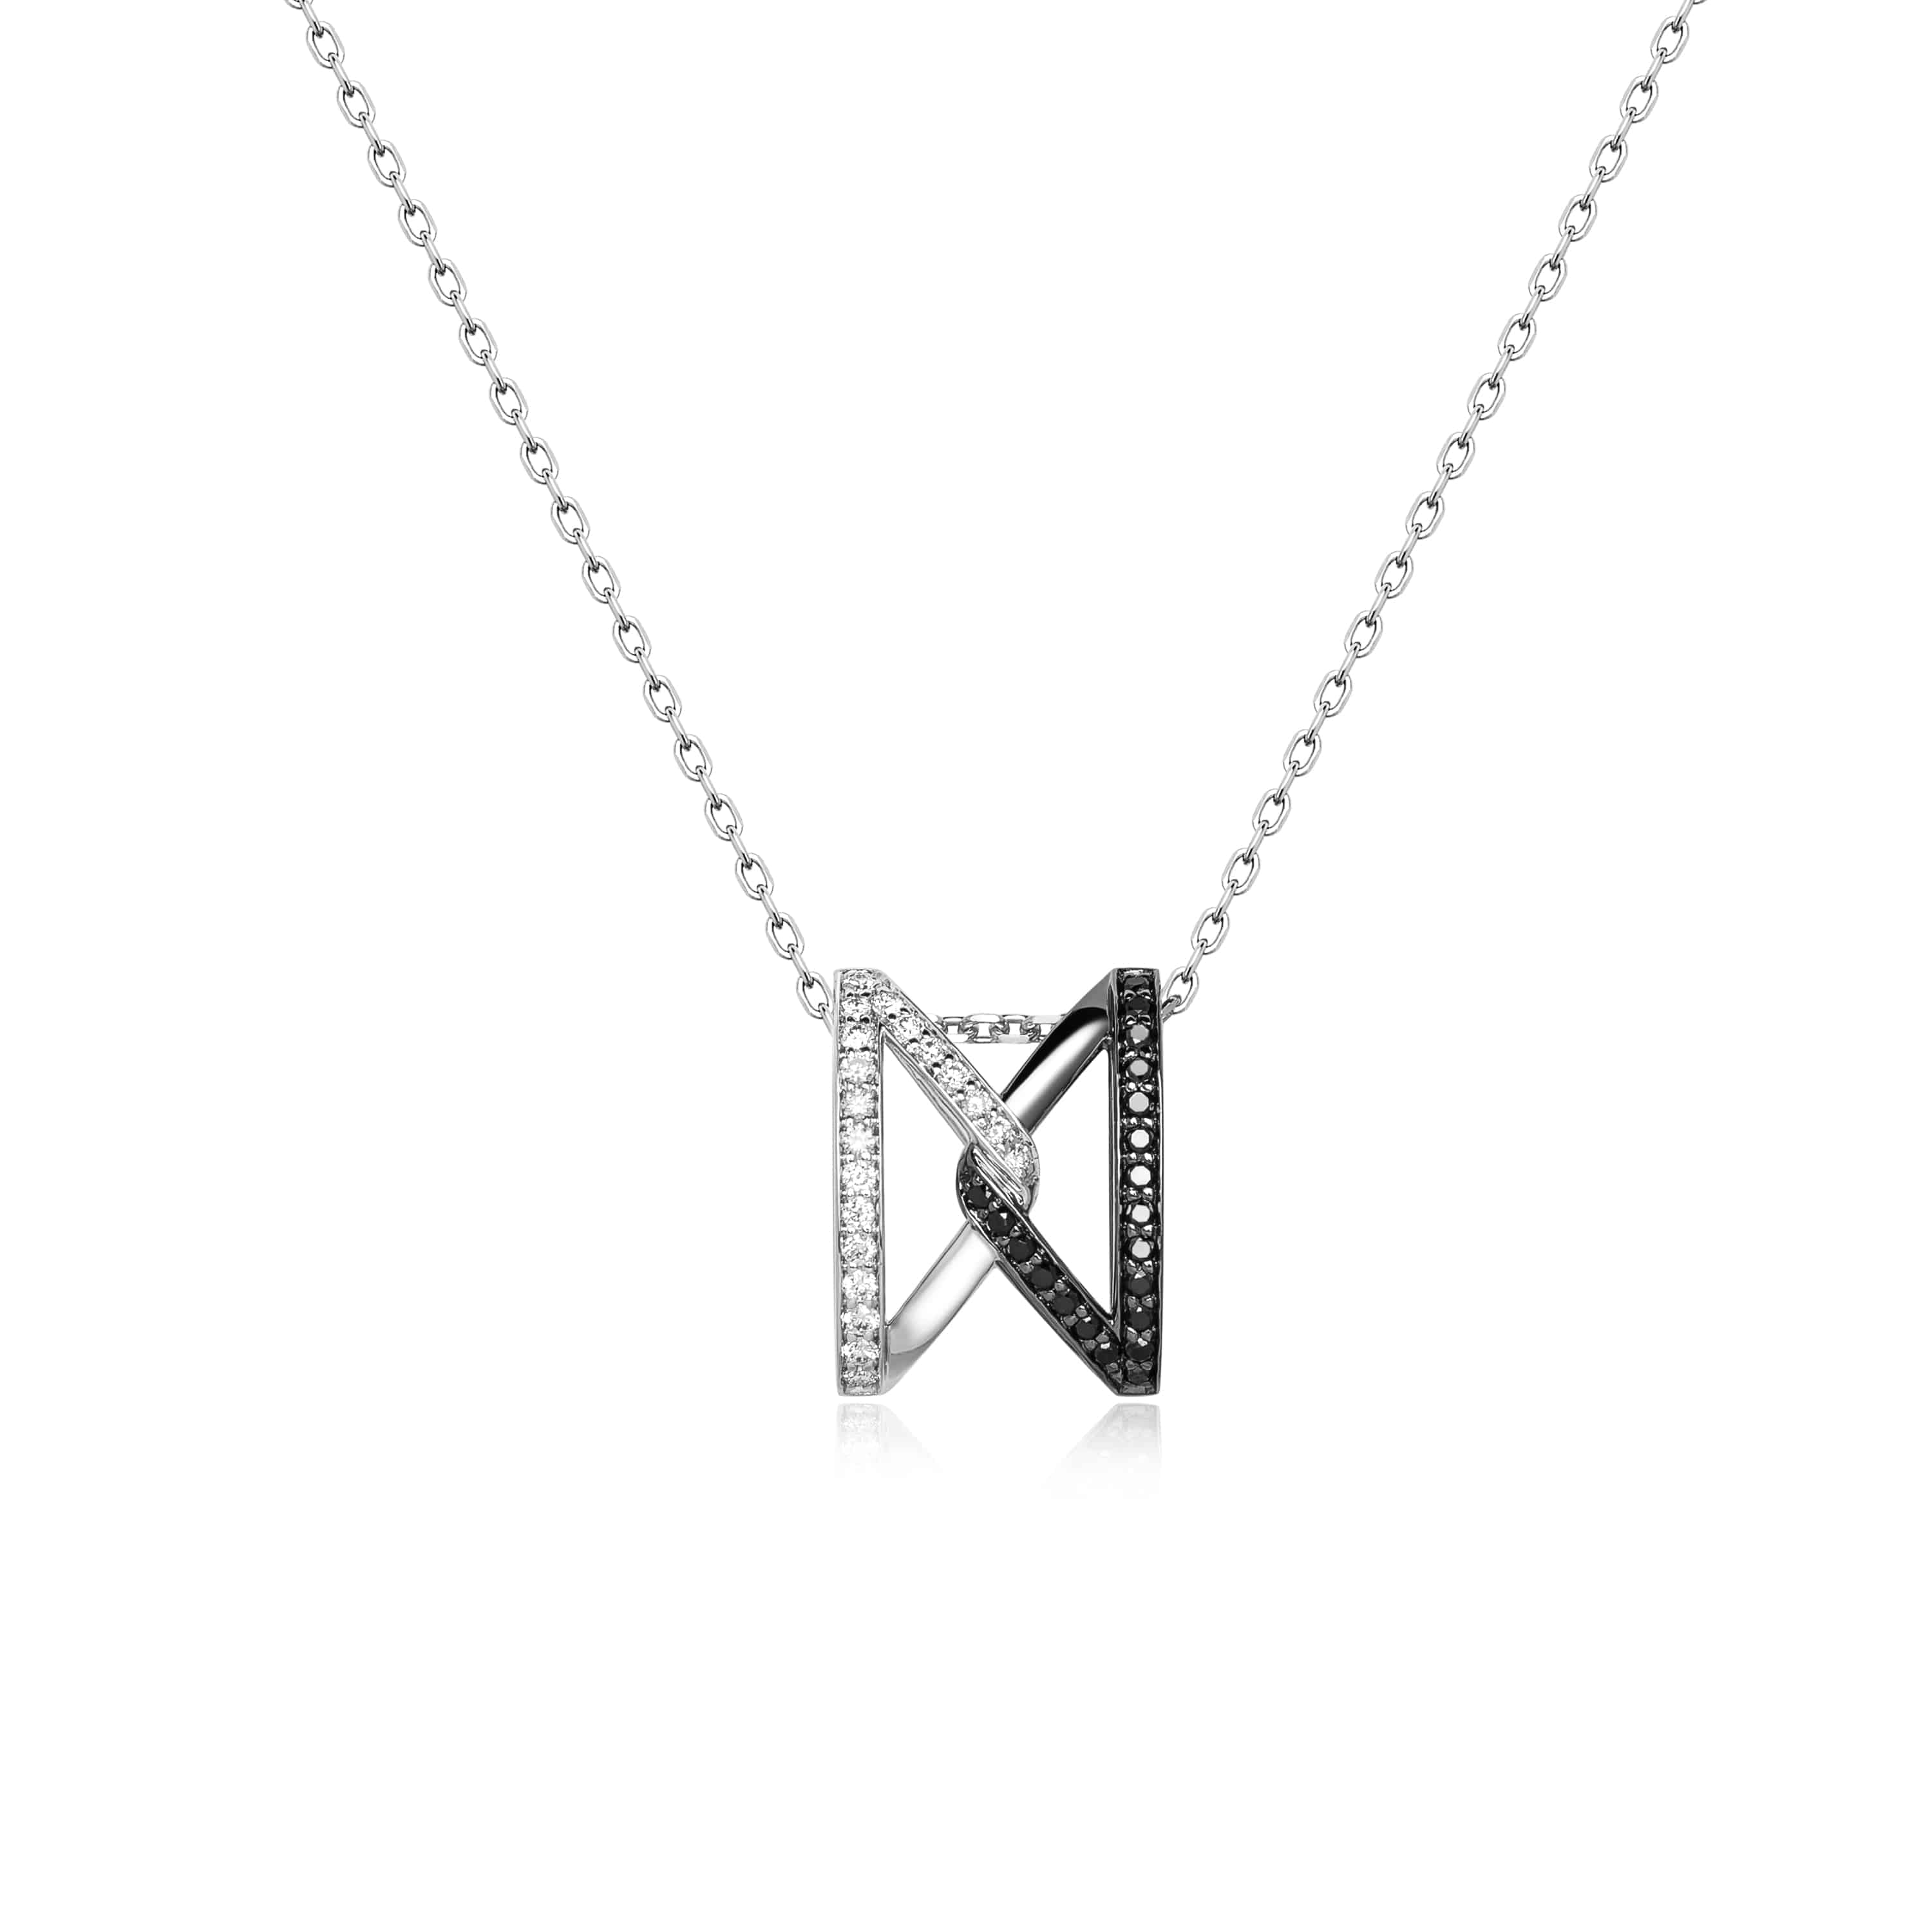 The Big Z Necklace in White Gold with Black and White Diamonds